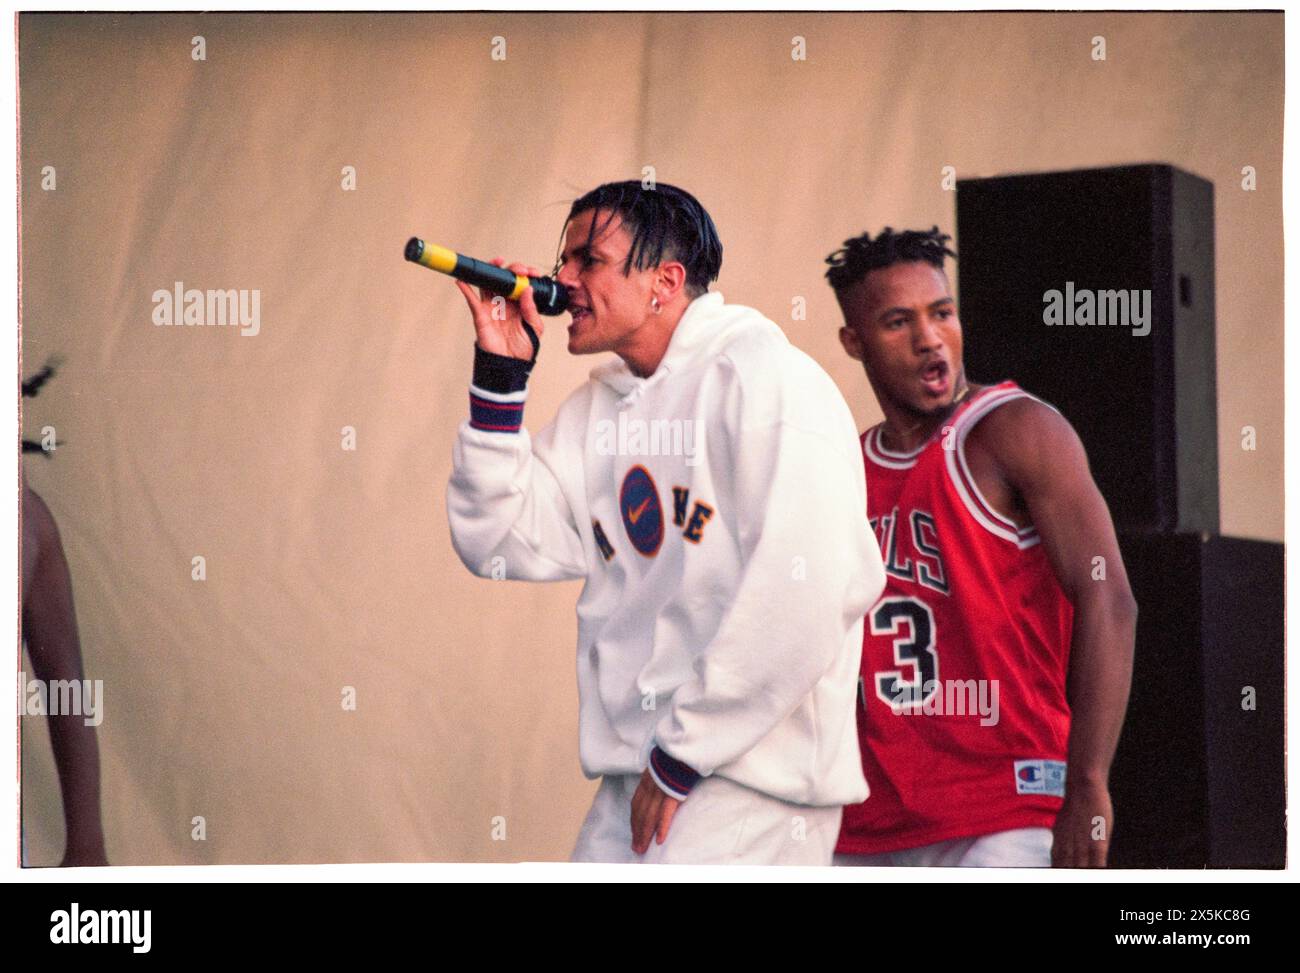 PETER ANDRE, YOUNG, 1996: A young Peter Andre at a Red Dragon FM Pop Concert featuring dozens of pop acts in Barry, Wales, UK on 27 May 1996. Photo: Rob Watkins Photo: Rob Watkins. INFO:  Peter Andre, born on February 27, 1973, in Harrow, London, is a British-Australian singer, songwriter, and television personality. Rising to fame in the '90s, he has enjoyed success in music, reality television, and philanthropy. Stock Photo